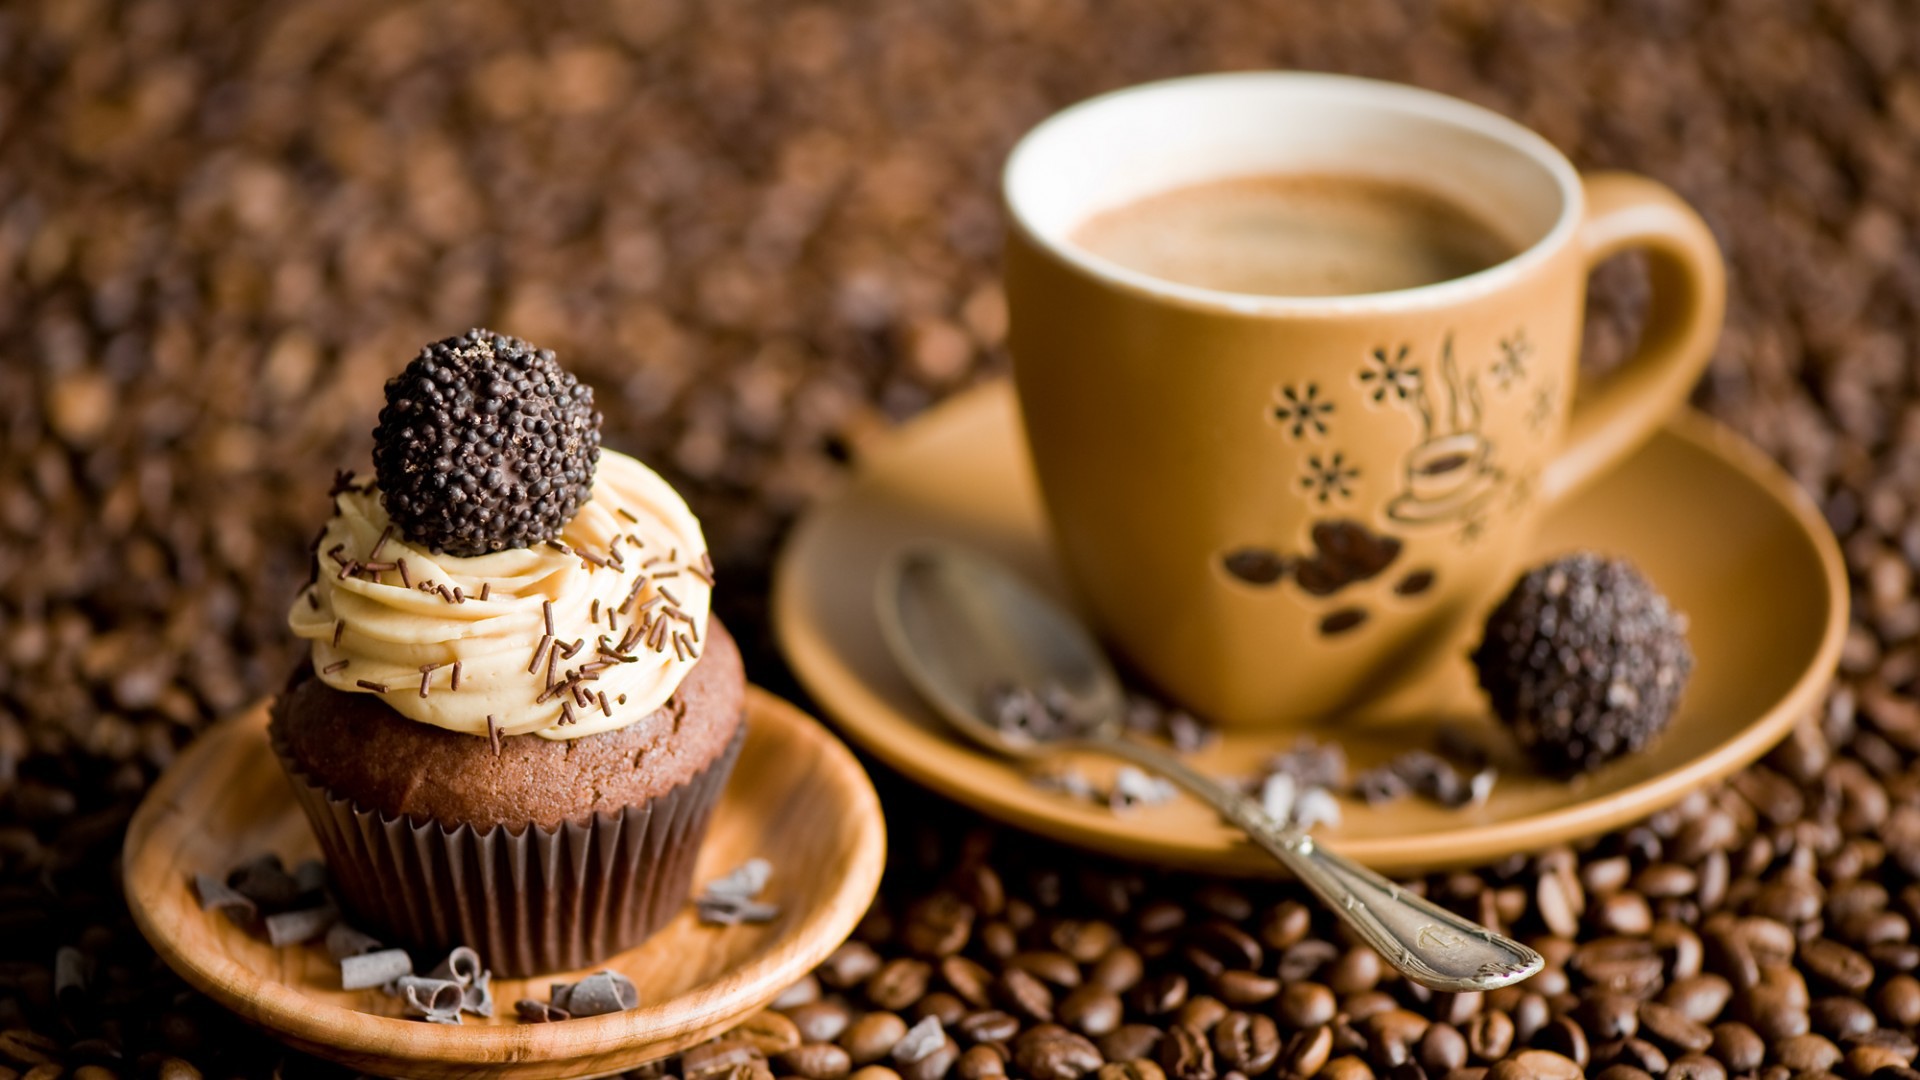 Coffee And Chocolate Cake Wallpaper Image Pictures